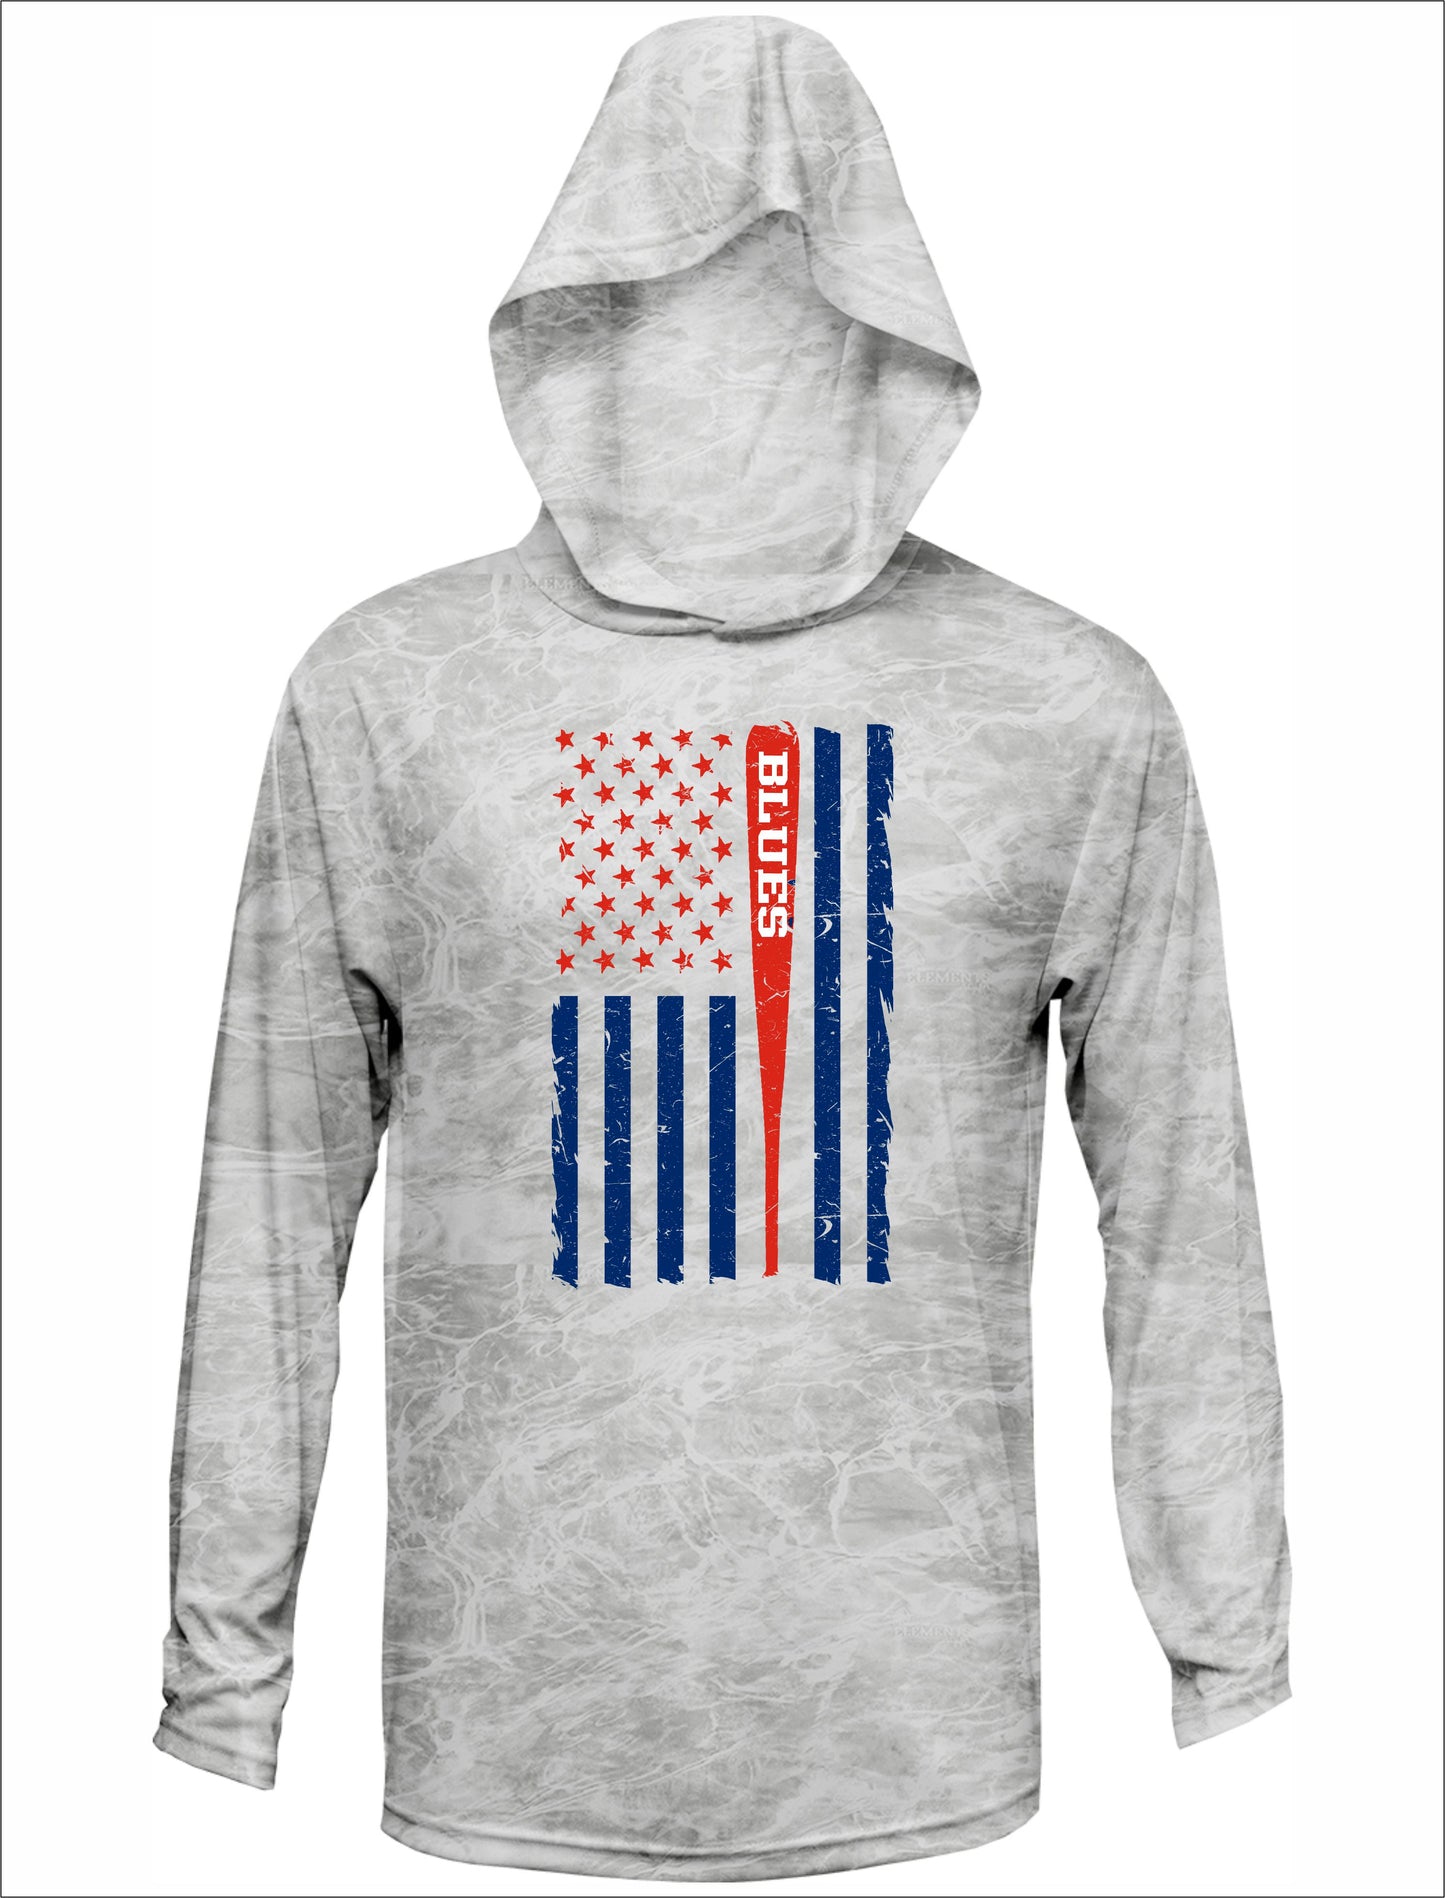 TX BLUES FLAG STYLE DRI-FIT TEE WITH HOOD